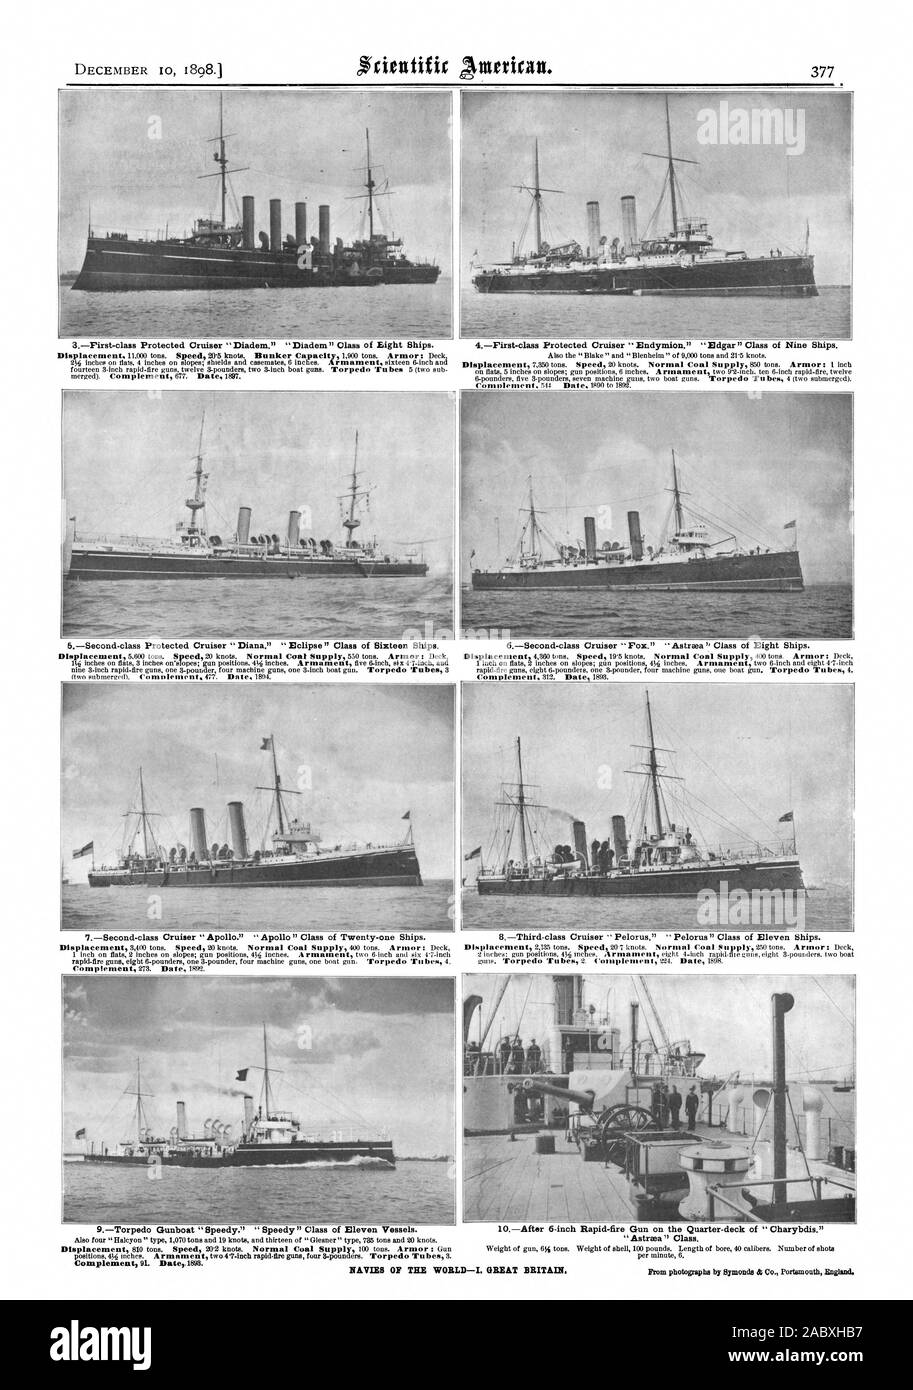 First-class Protected Cruiser 'Diadem.' 'Diadem' Class of Eight Ships. 7Second-class Cruiser 'Apollo.' 'Apollo' Class of Twenty-one Ships. SThird-class Cruiser 'Pelorus.' 'Pelorus' Class of Eleven Ships. 10After 6-inch Rapid-fire Gun on the Quarter-deck of 'Charybdis.' 'Astrwa' Class. Complement 9L Date.1893. NAVIES OF THE WORLD—I. GREAT BRITAIN. From photographs by Symonds & Co. Portsmouth xgland., scientific american, 1898-12-10 Stock Photo